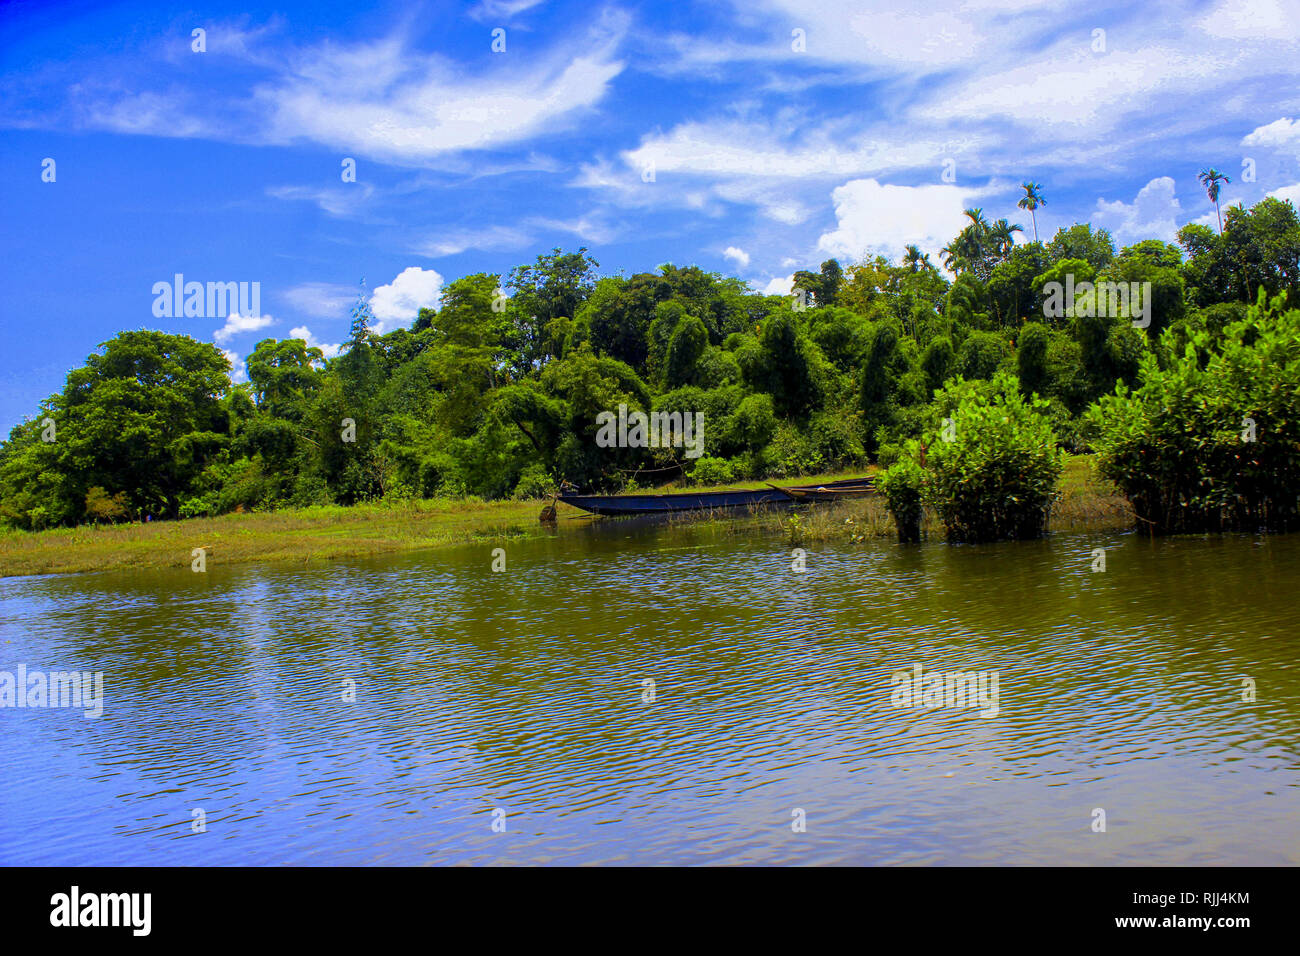 Beautiful river background picture in Bangladesh 2019 Stock Photo